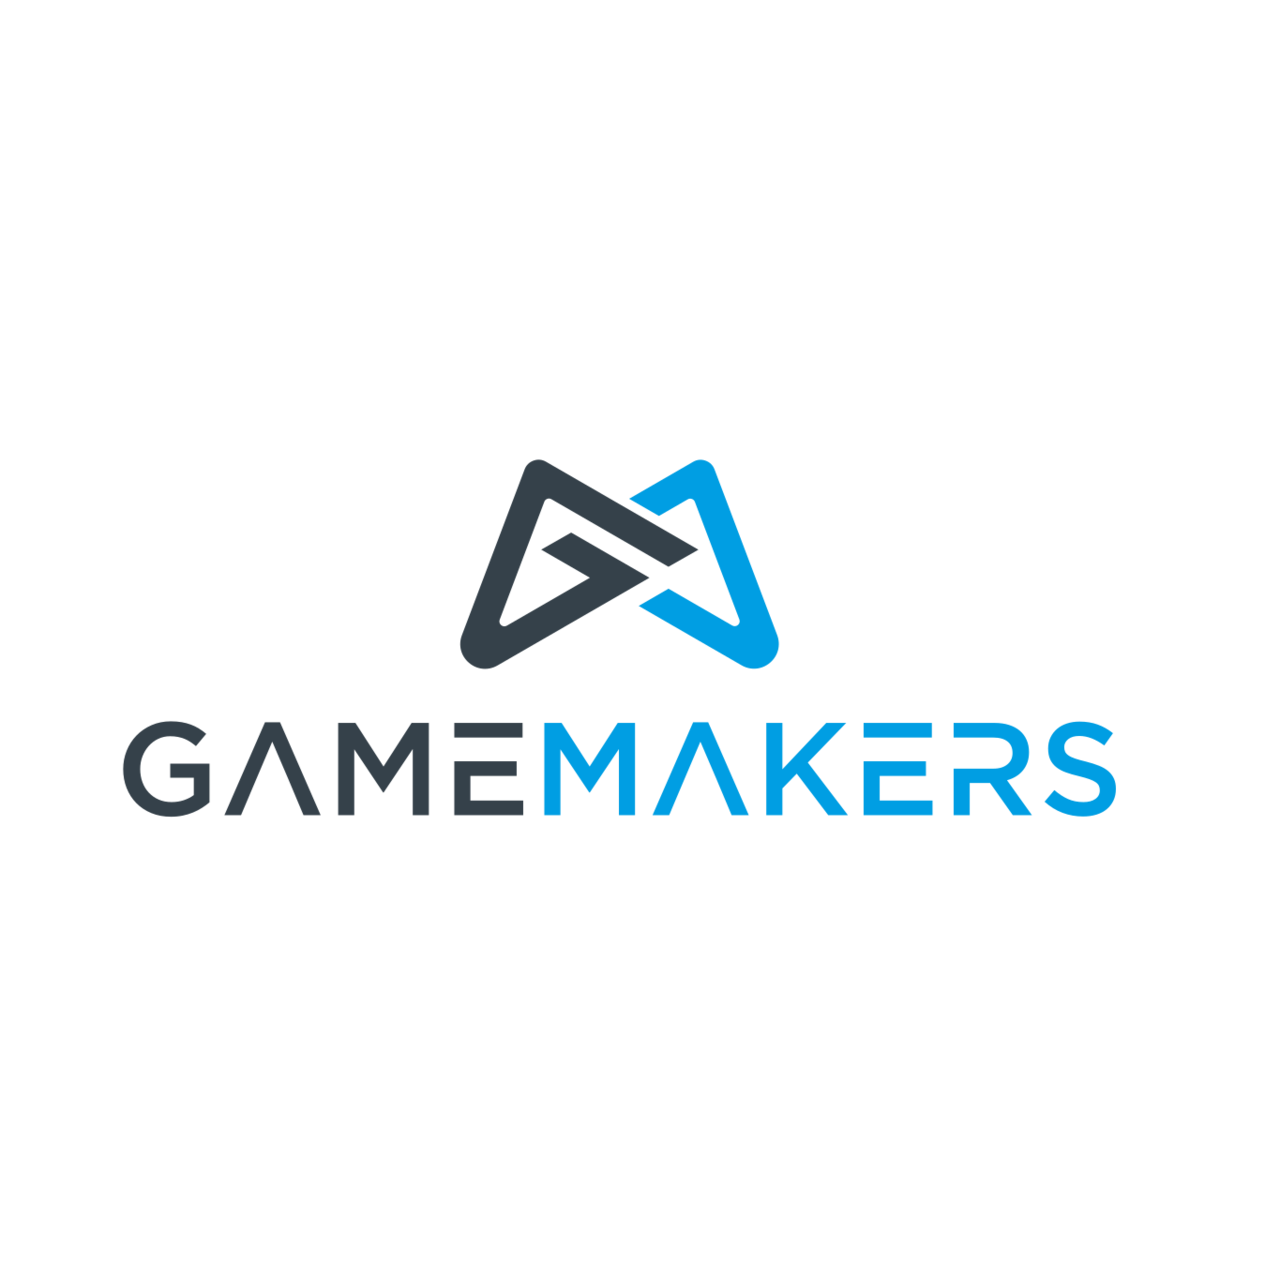 The GameMakers Letter